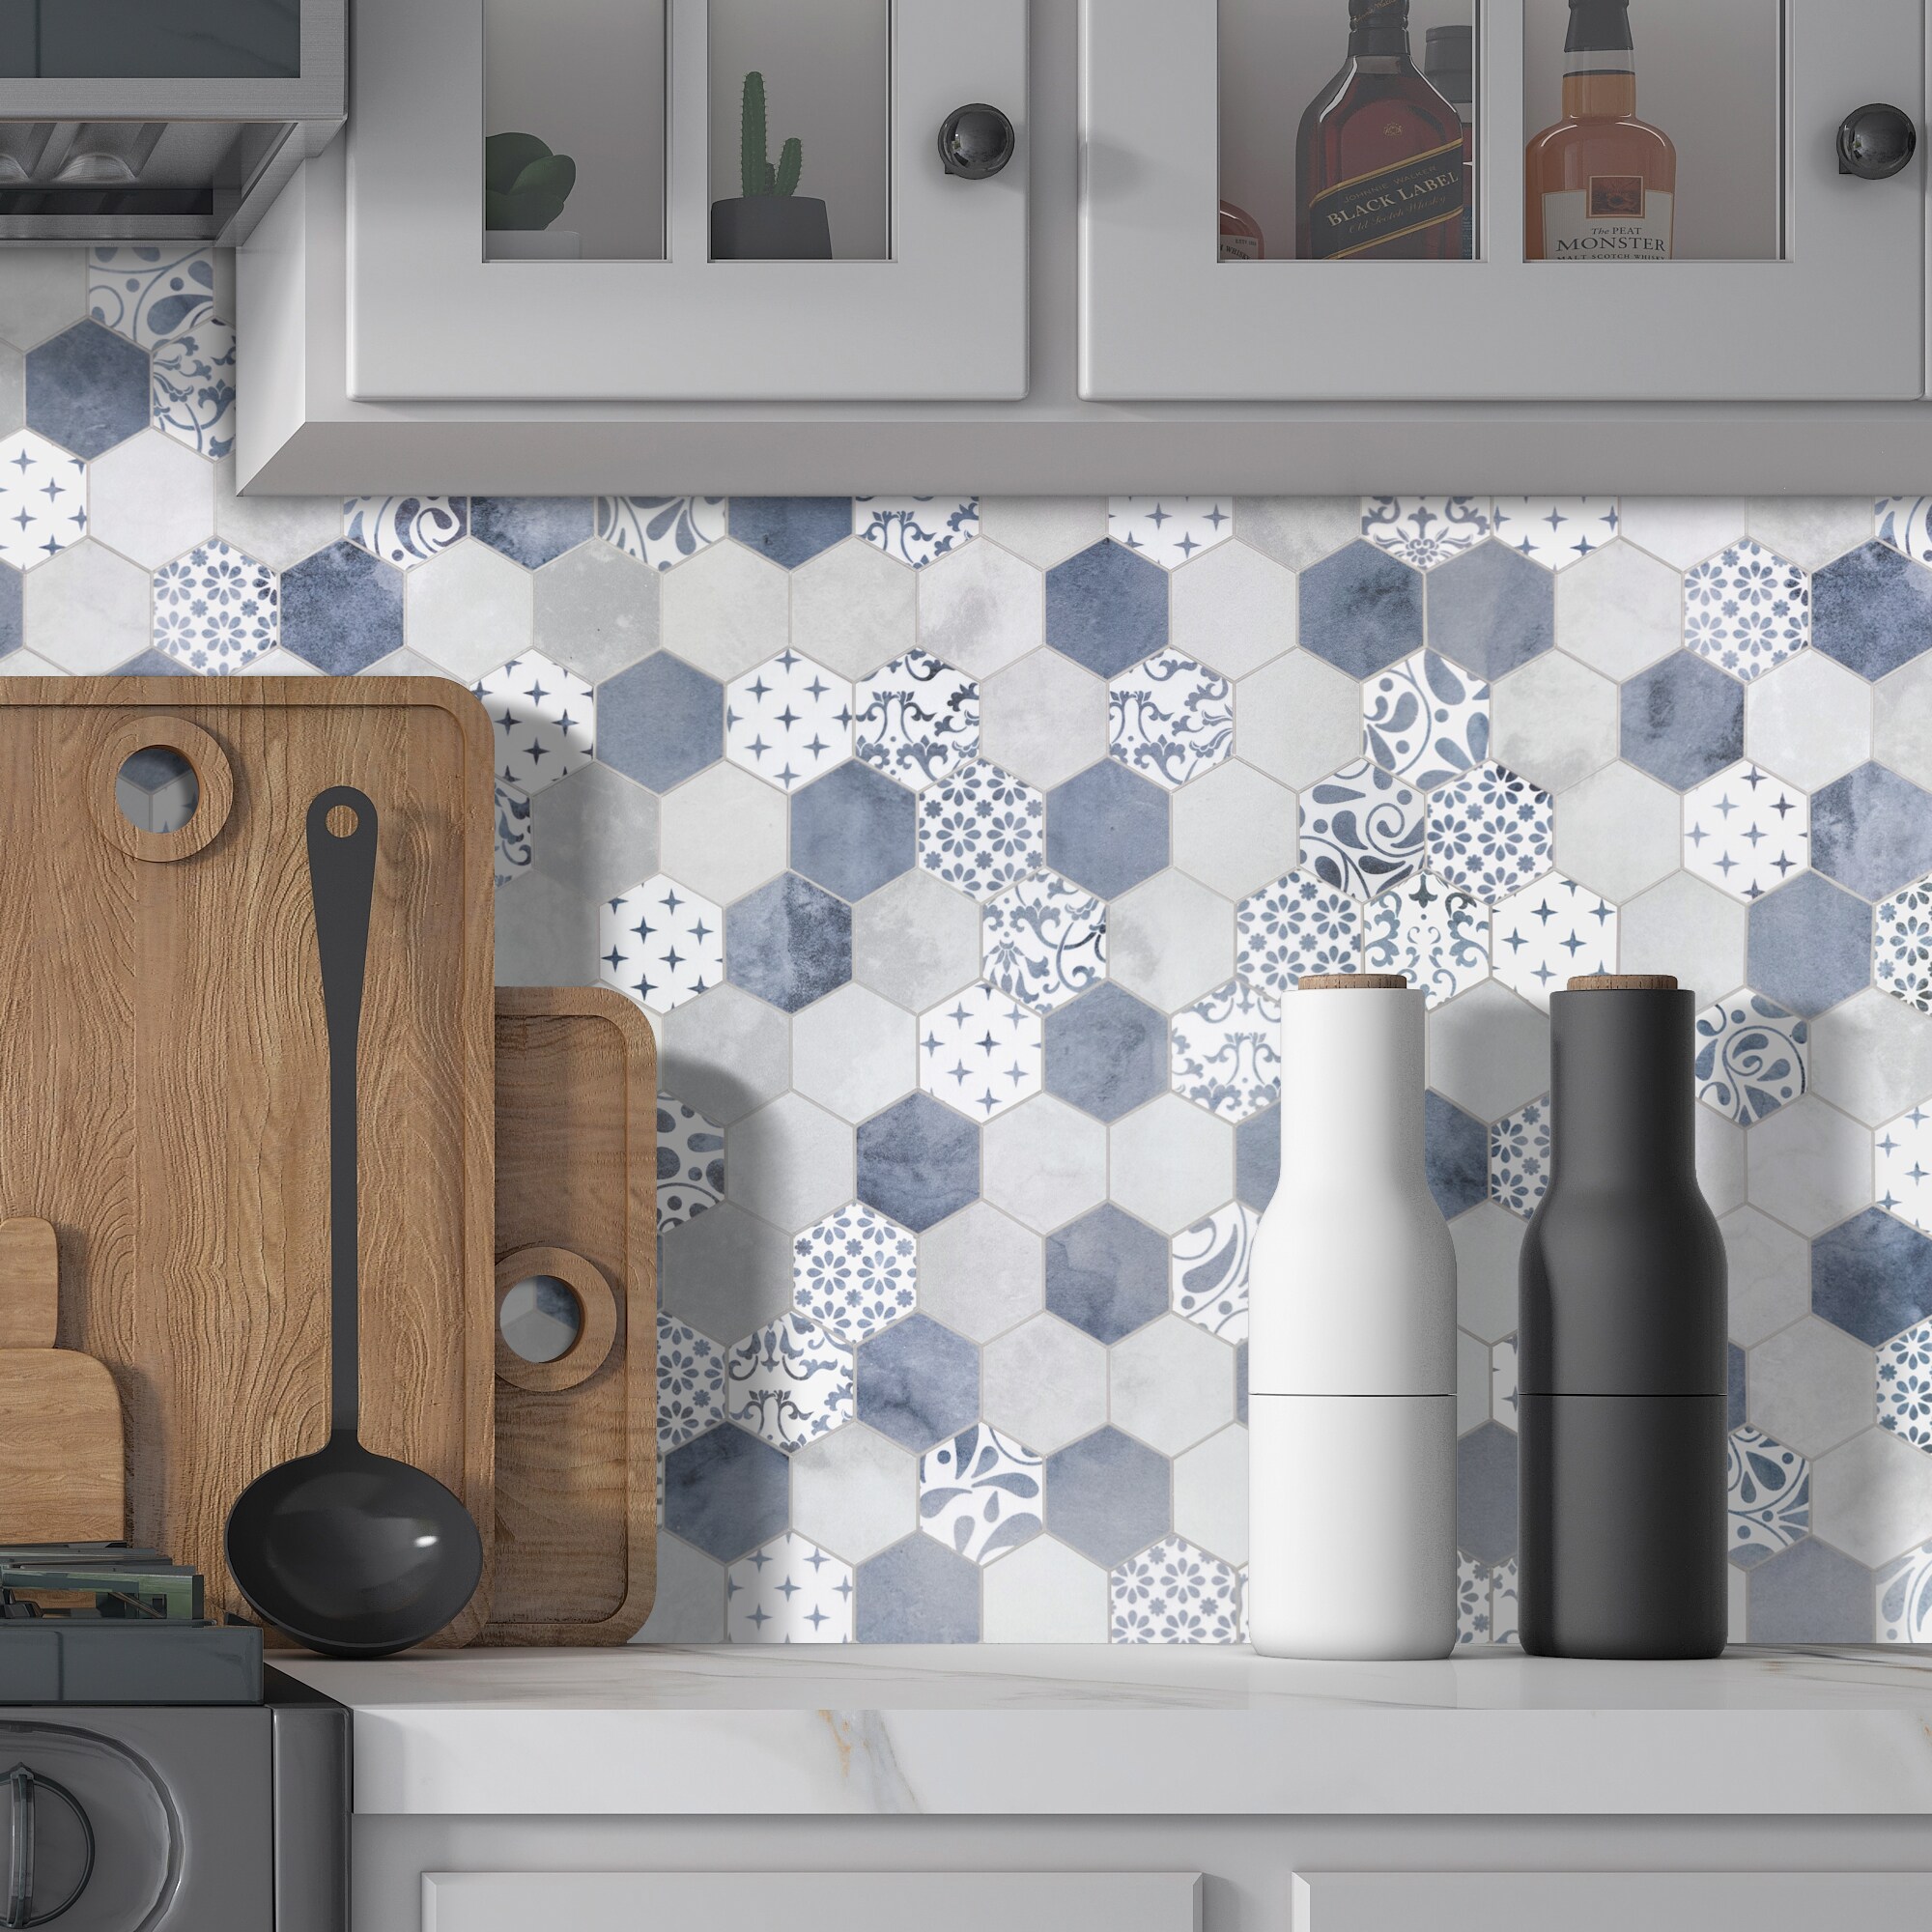 sunwings Hexagon 12.5 in. x 12.2 in. Peel and Stick Backsplash Stone Composite Wall Tile, Cement Blue (10 tiles, 9.00 Sq.Ft.)